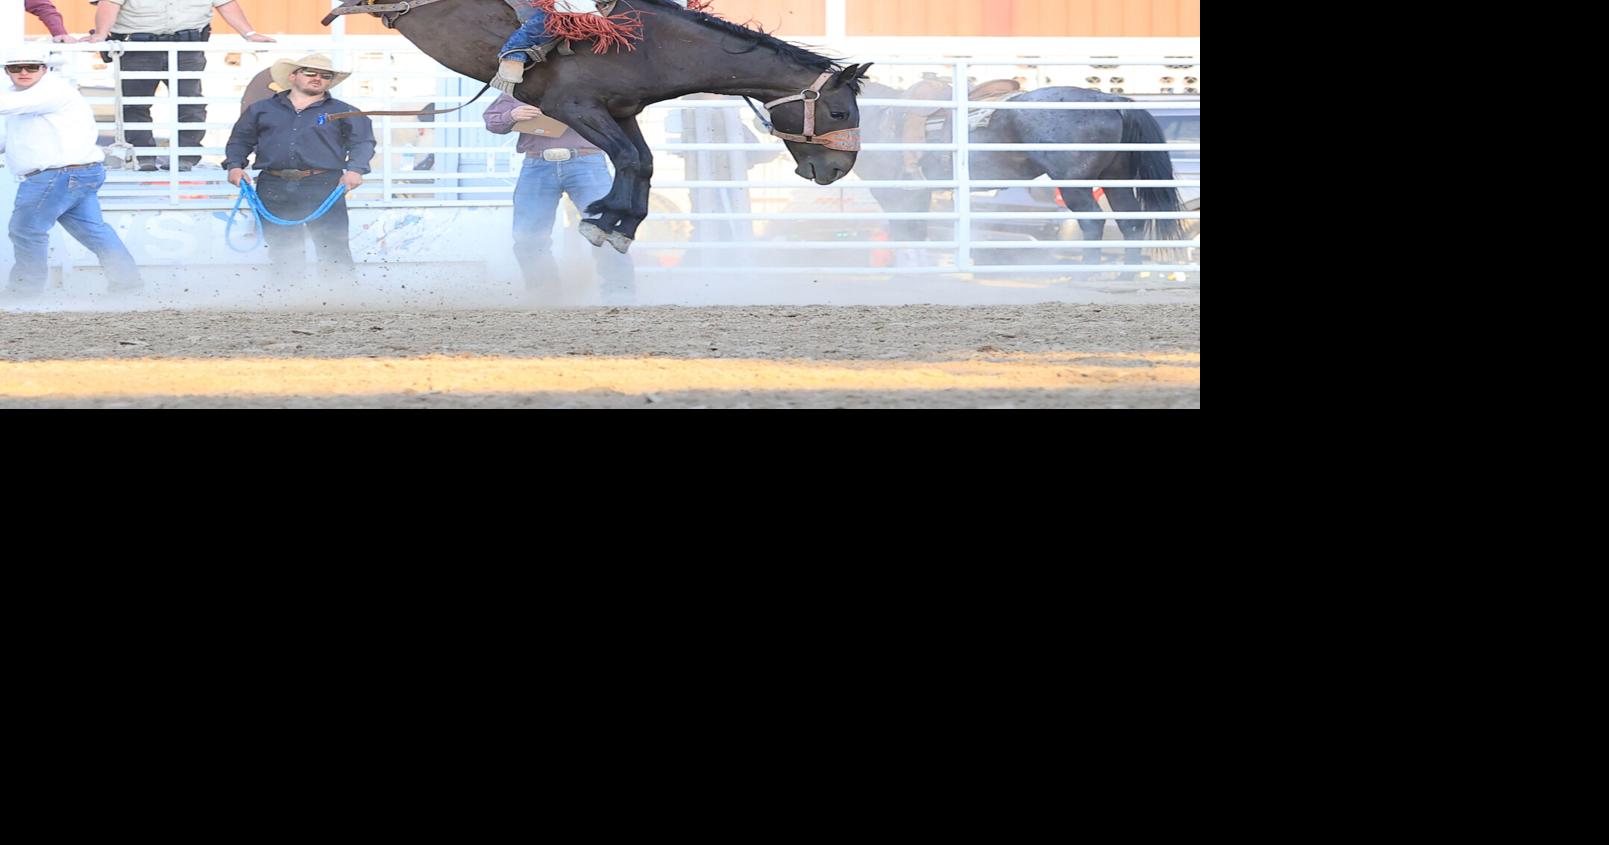 Oregon Trail Rodeo ready to go in Hastings News